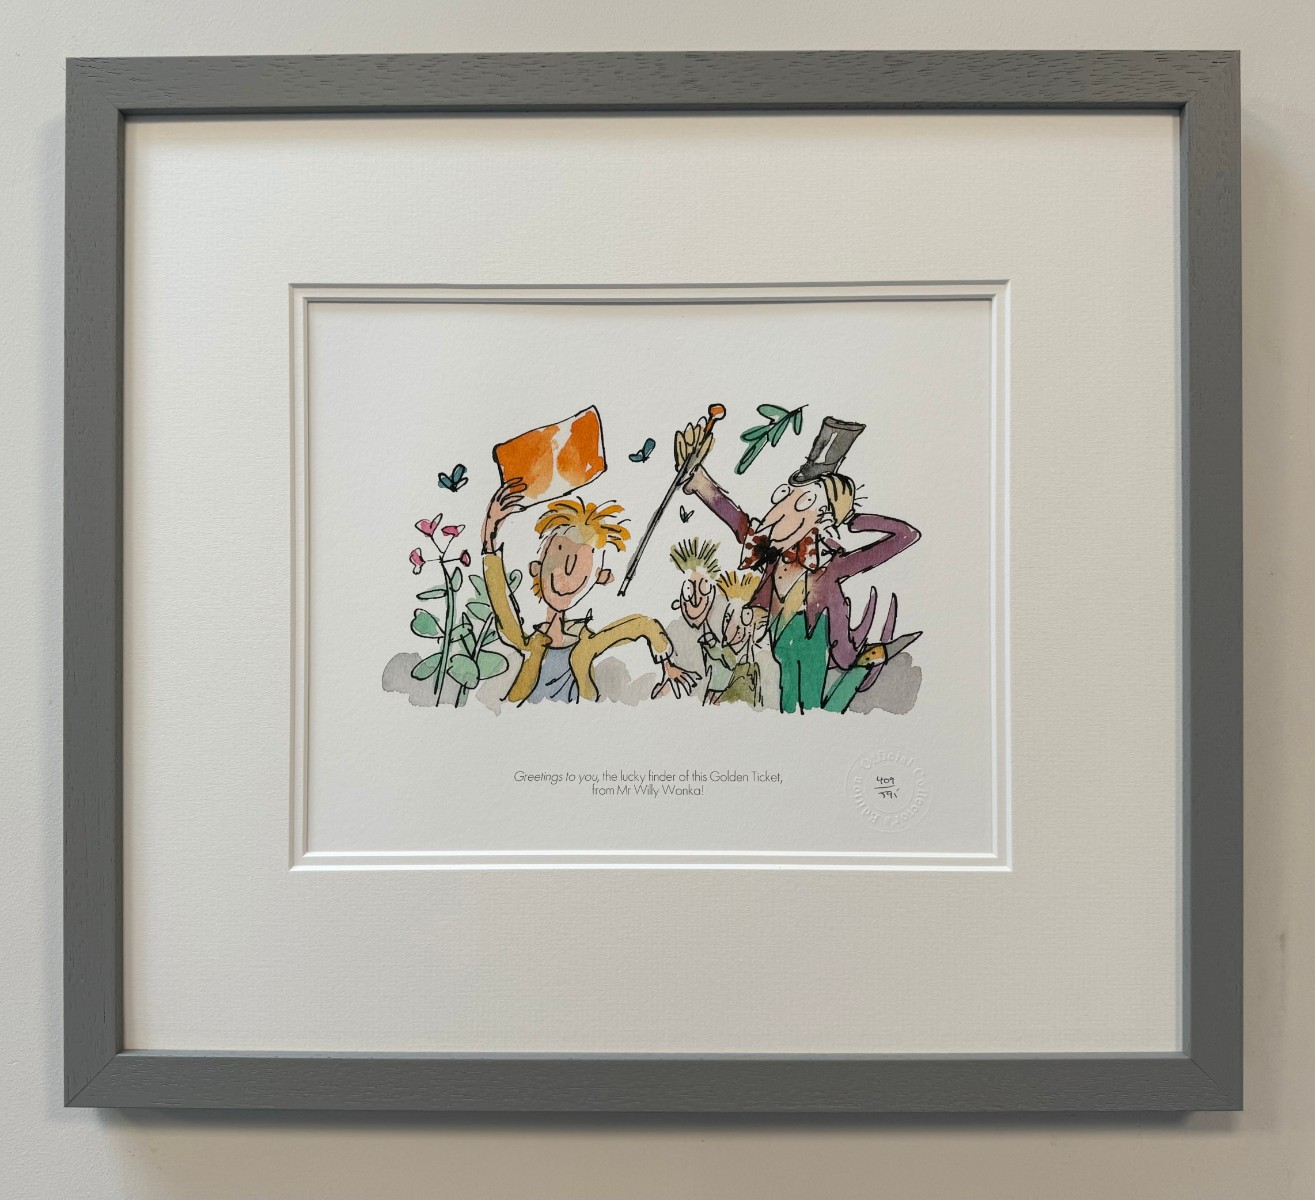 Greetings to You by Quentin Blake